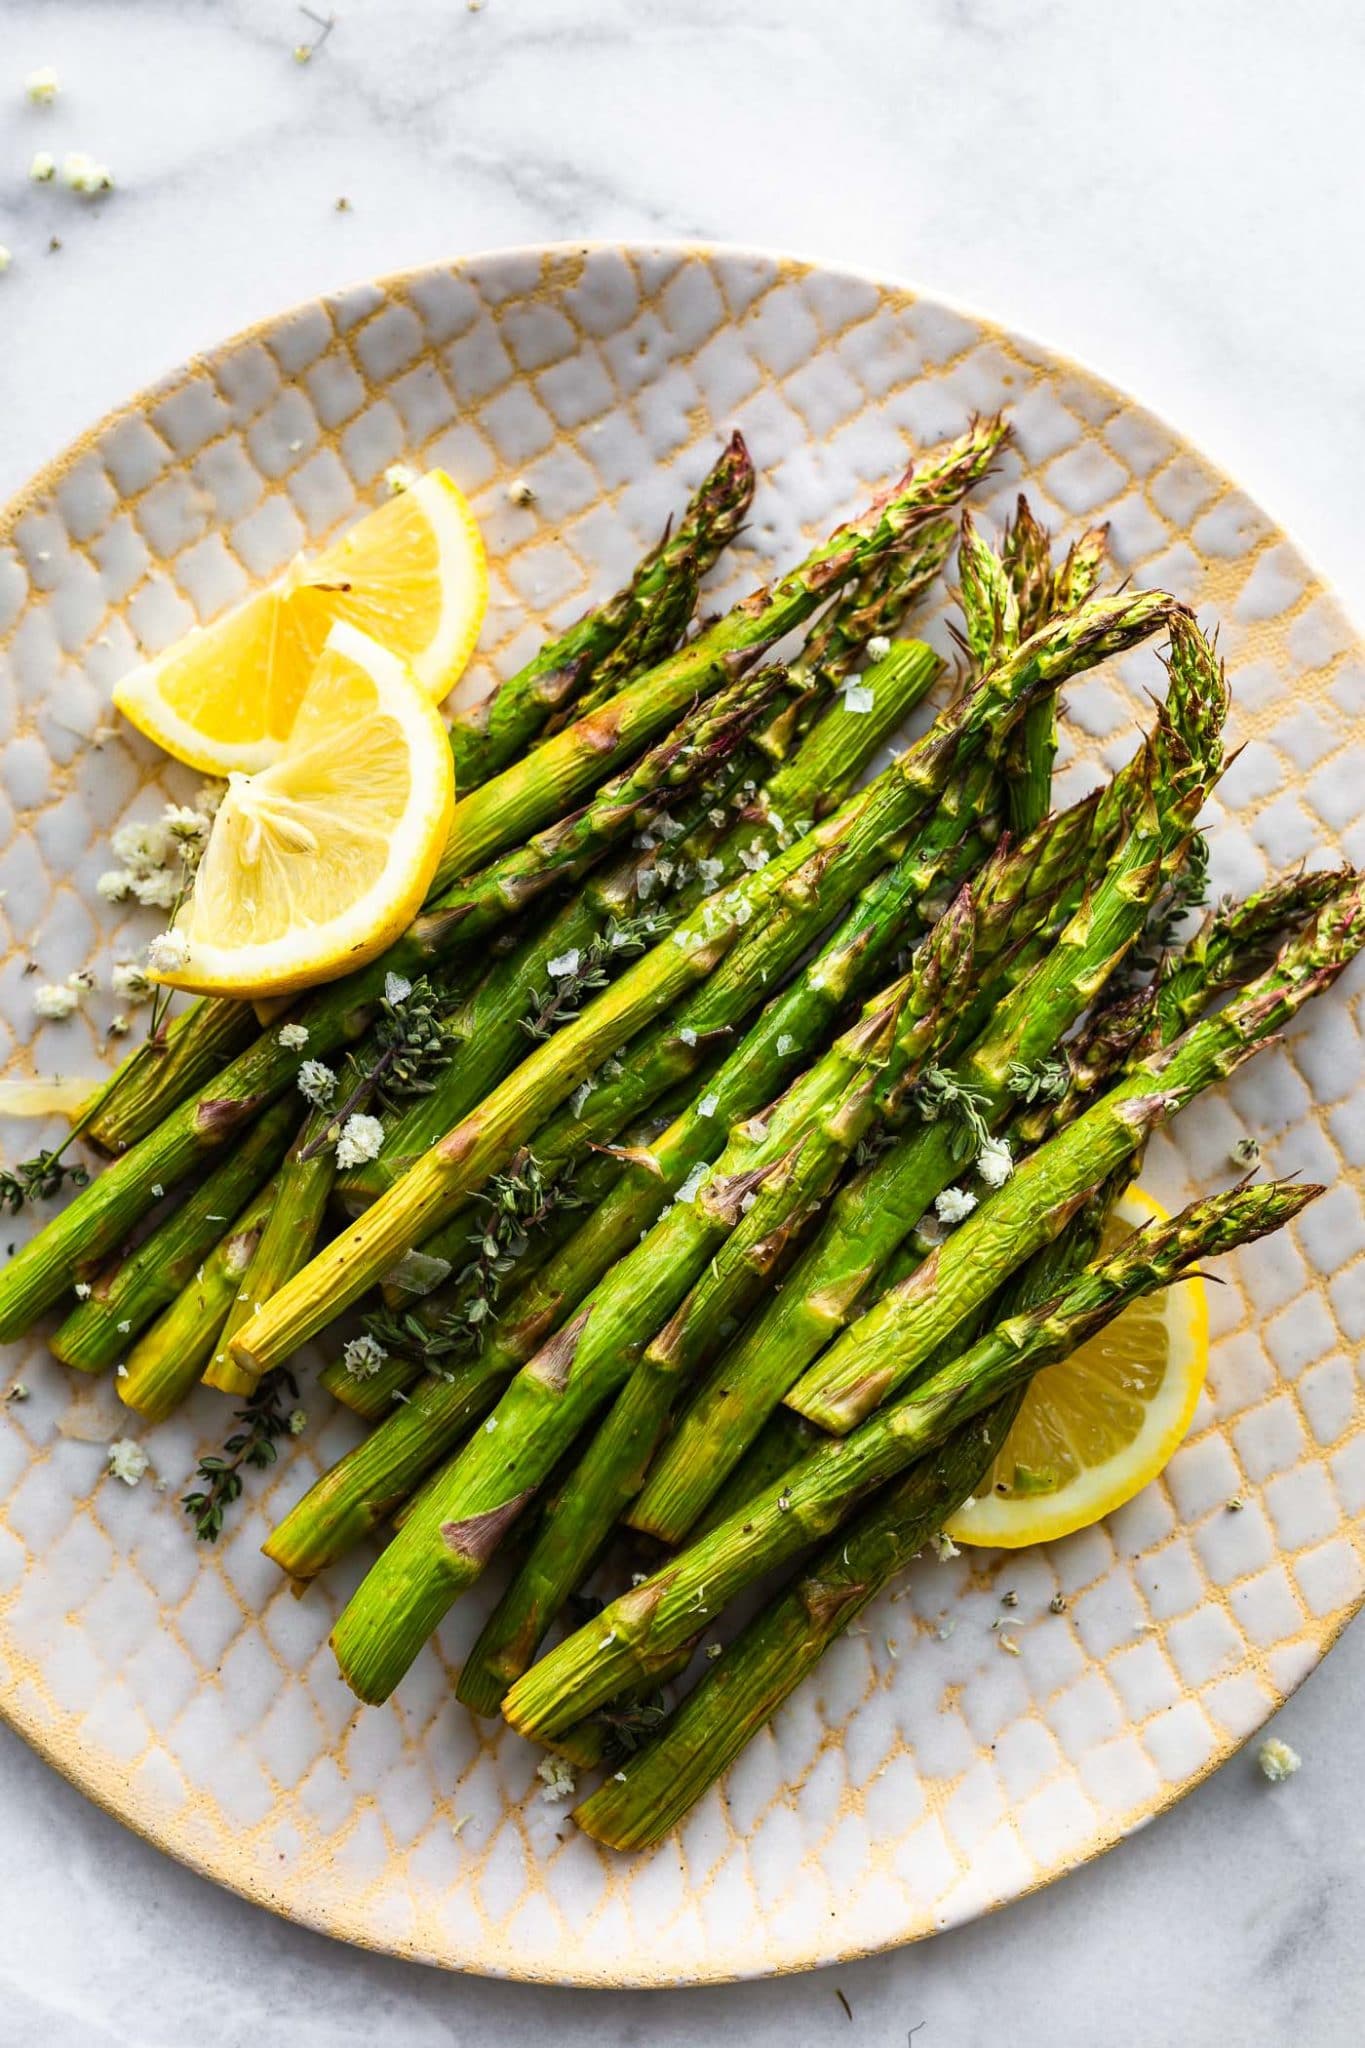 Overhead image of air fryer roasted asparagus on a plate with thin wedges of lemon.